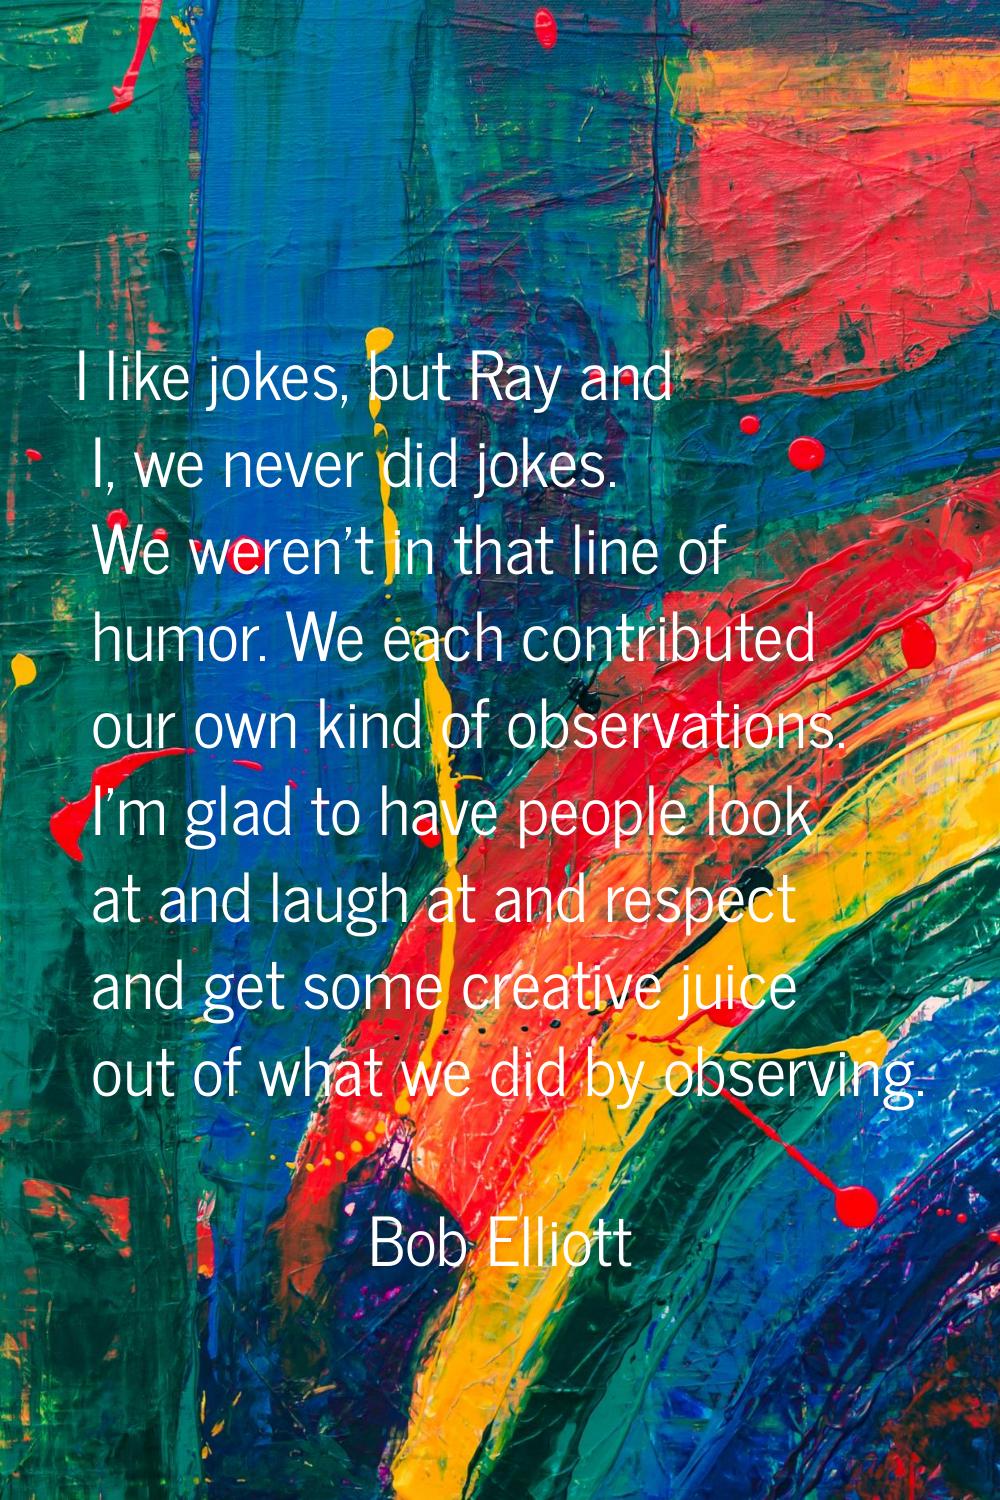 I like jokes, but Ray and I, we never did jokes. We weren't in that line of humor. We each contribu